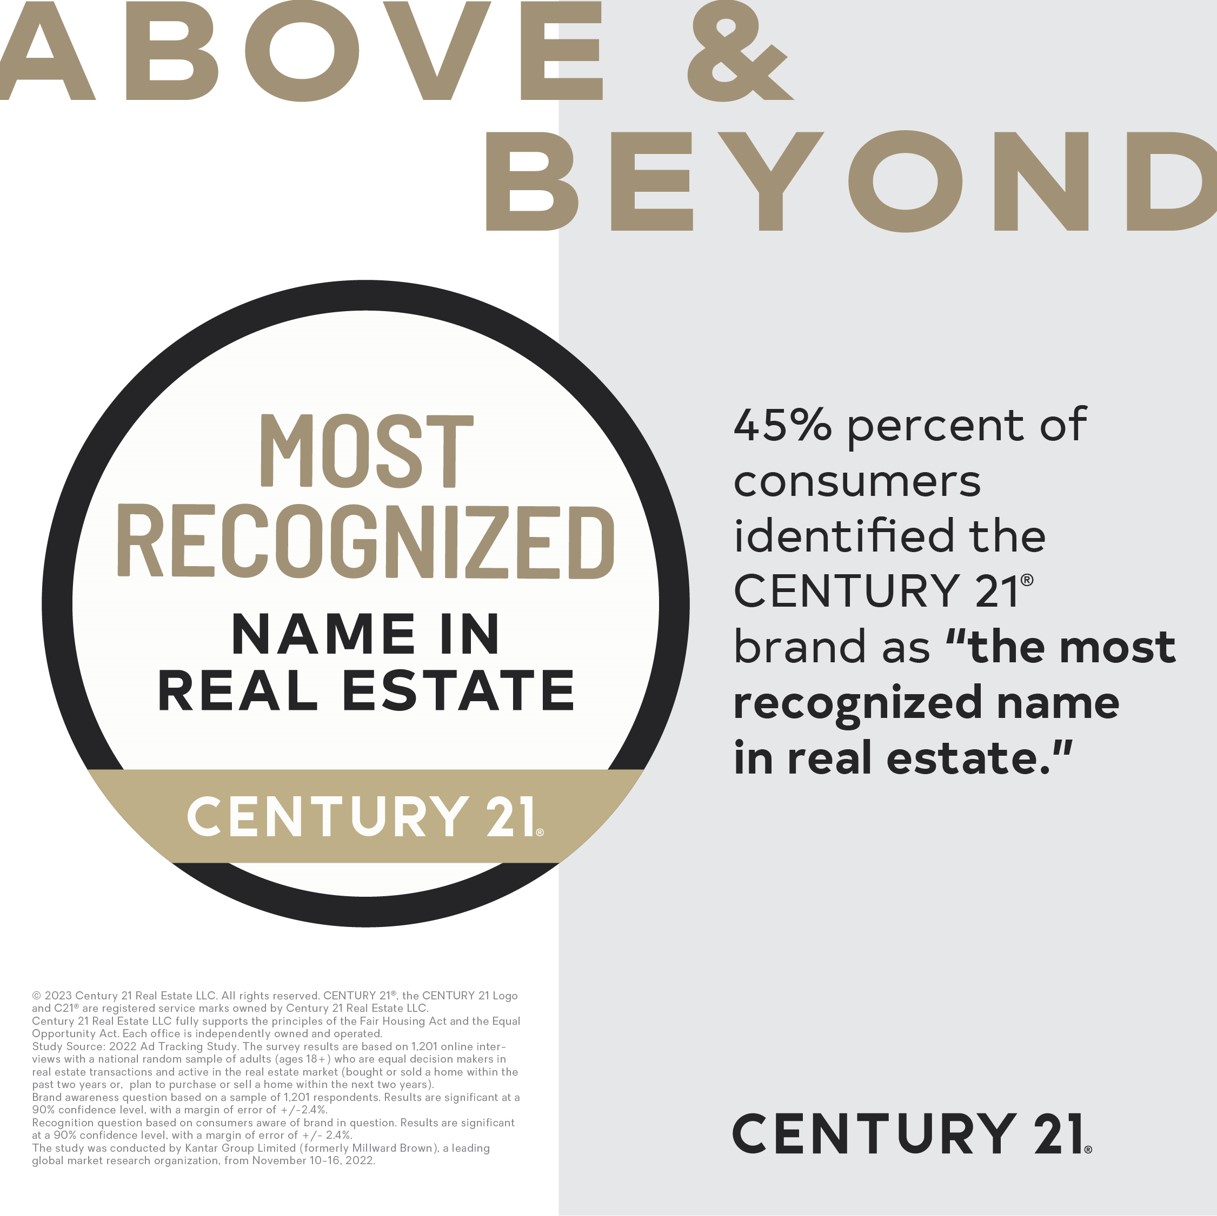 Kantar Claims: Most Recognized Name in Real Estate